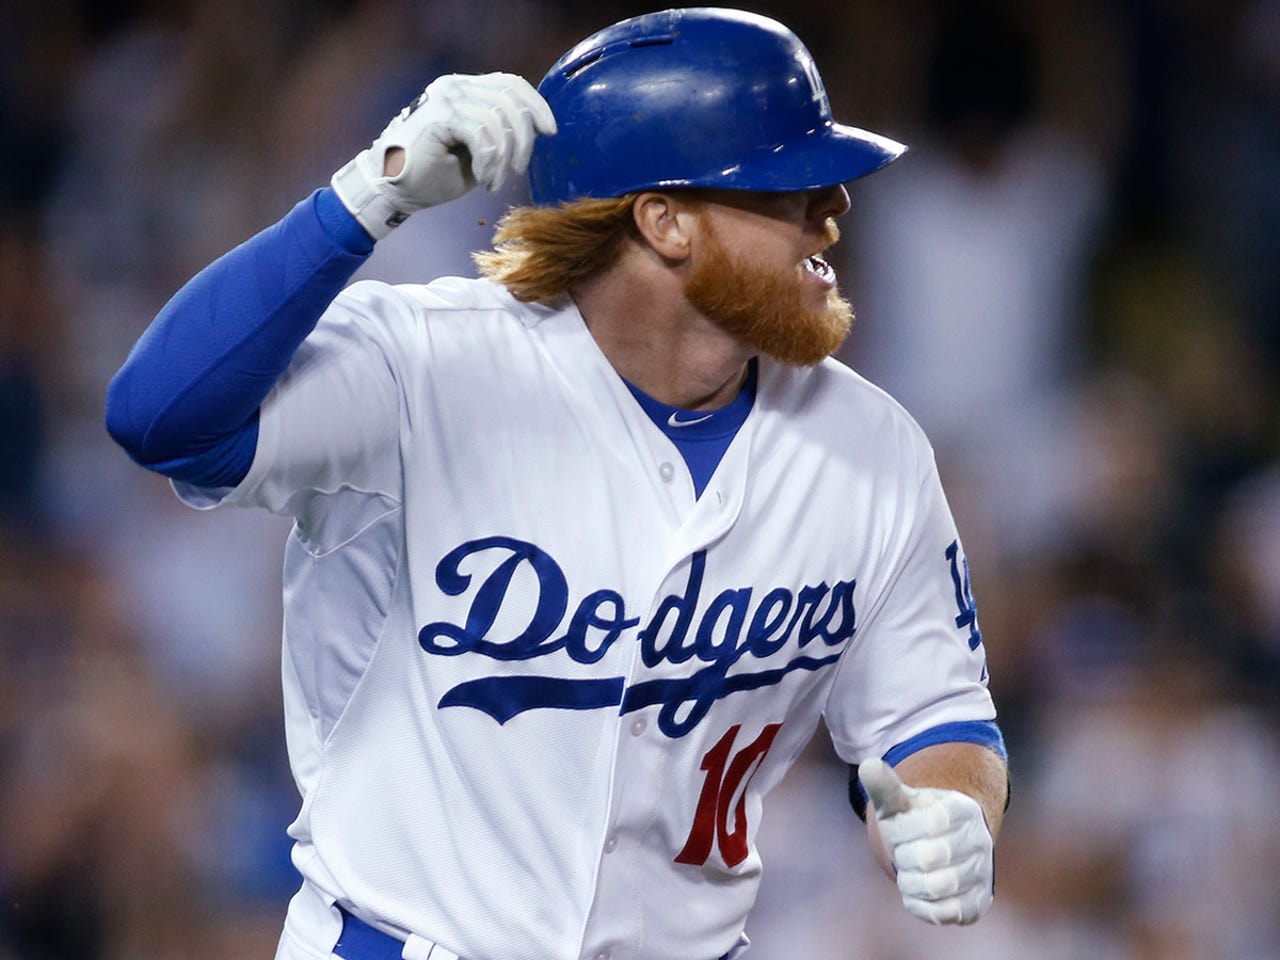 Dodgers' Justin Turner coming through in the clutch